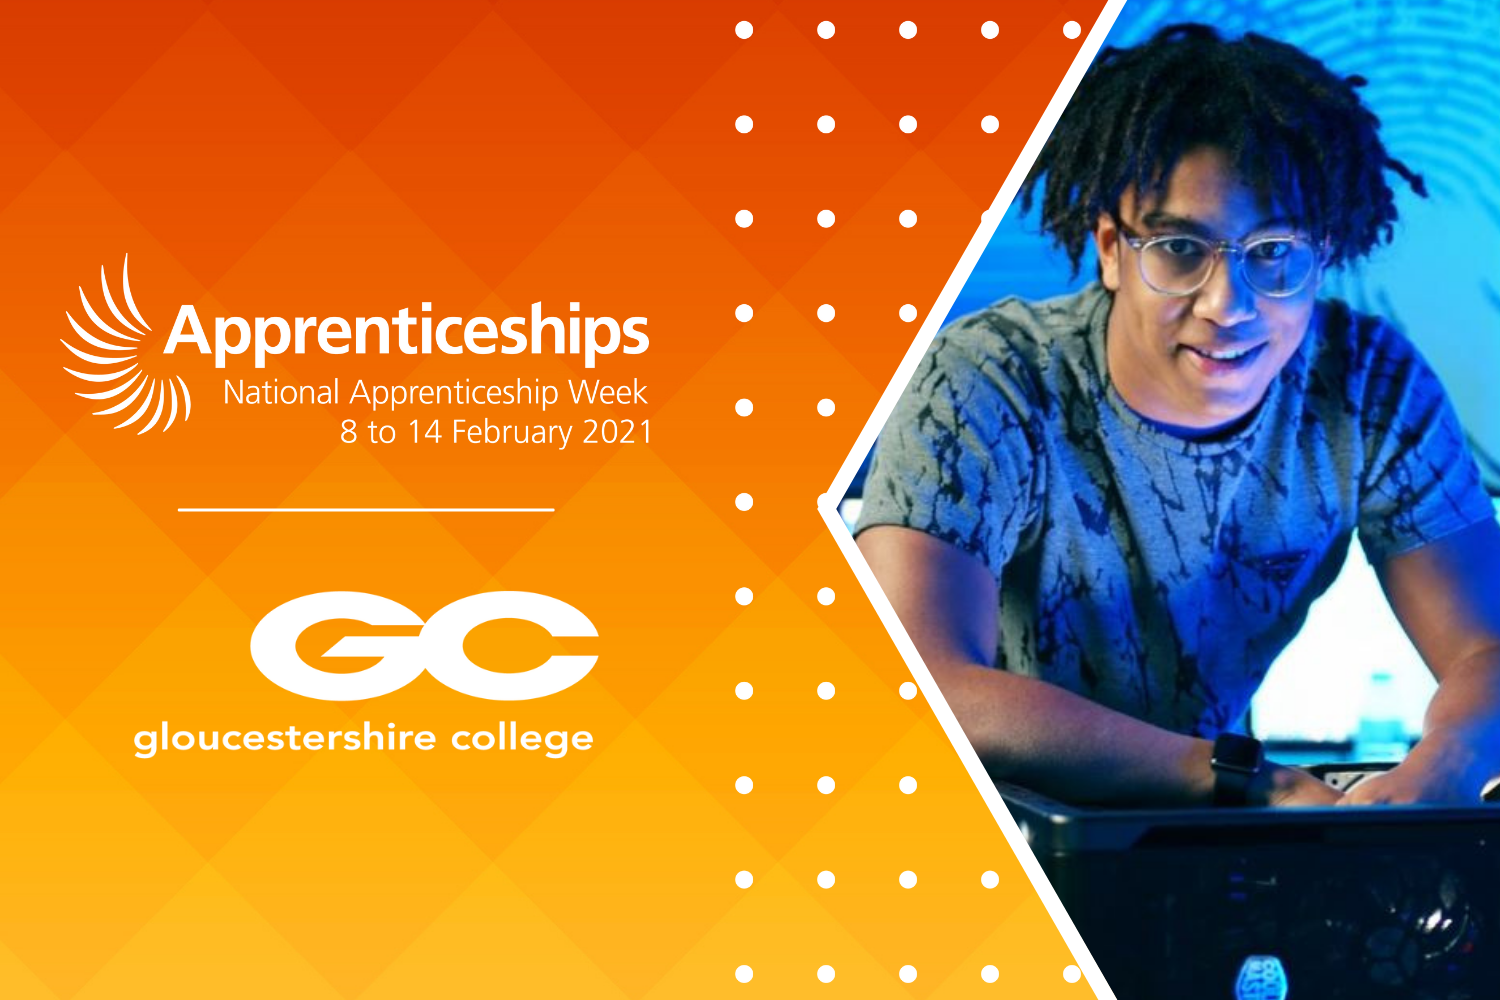 Develop your future with IT and Cyber apprenticeships at Gloucestershire College